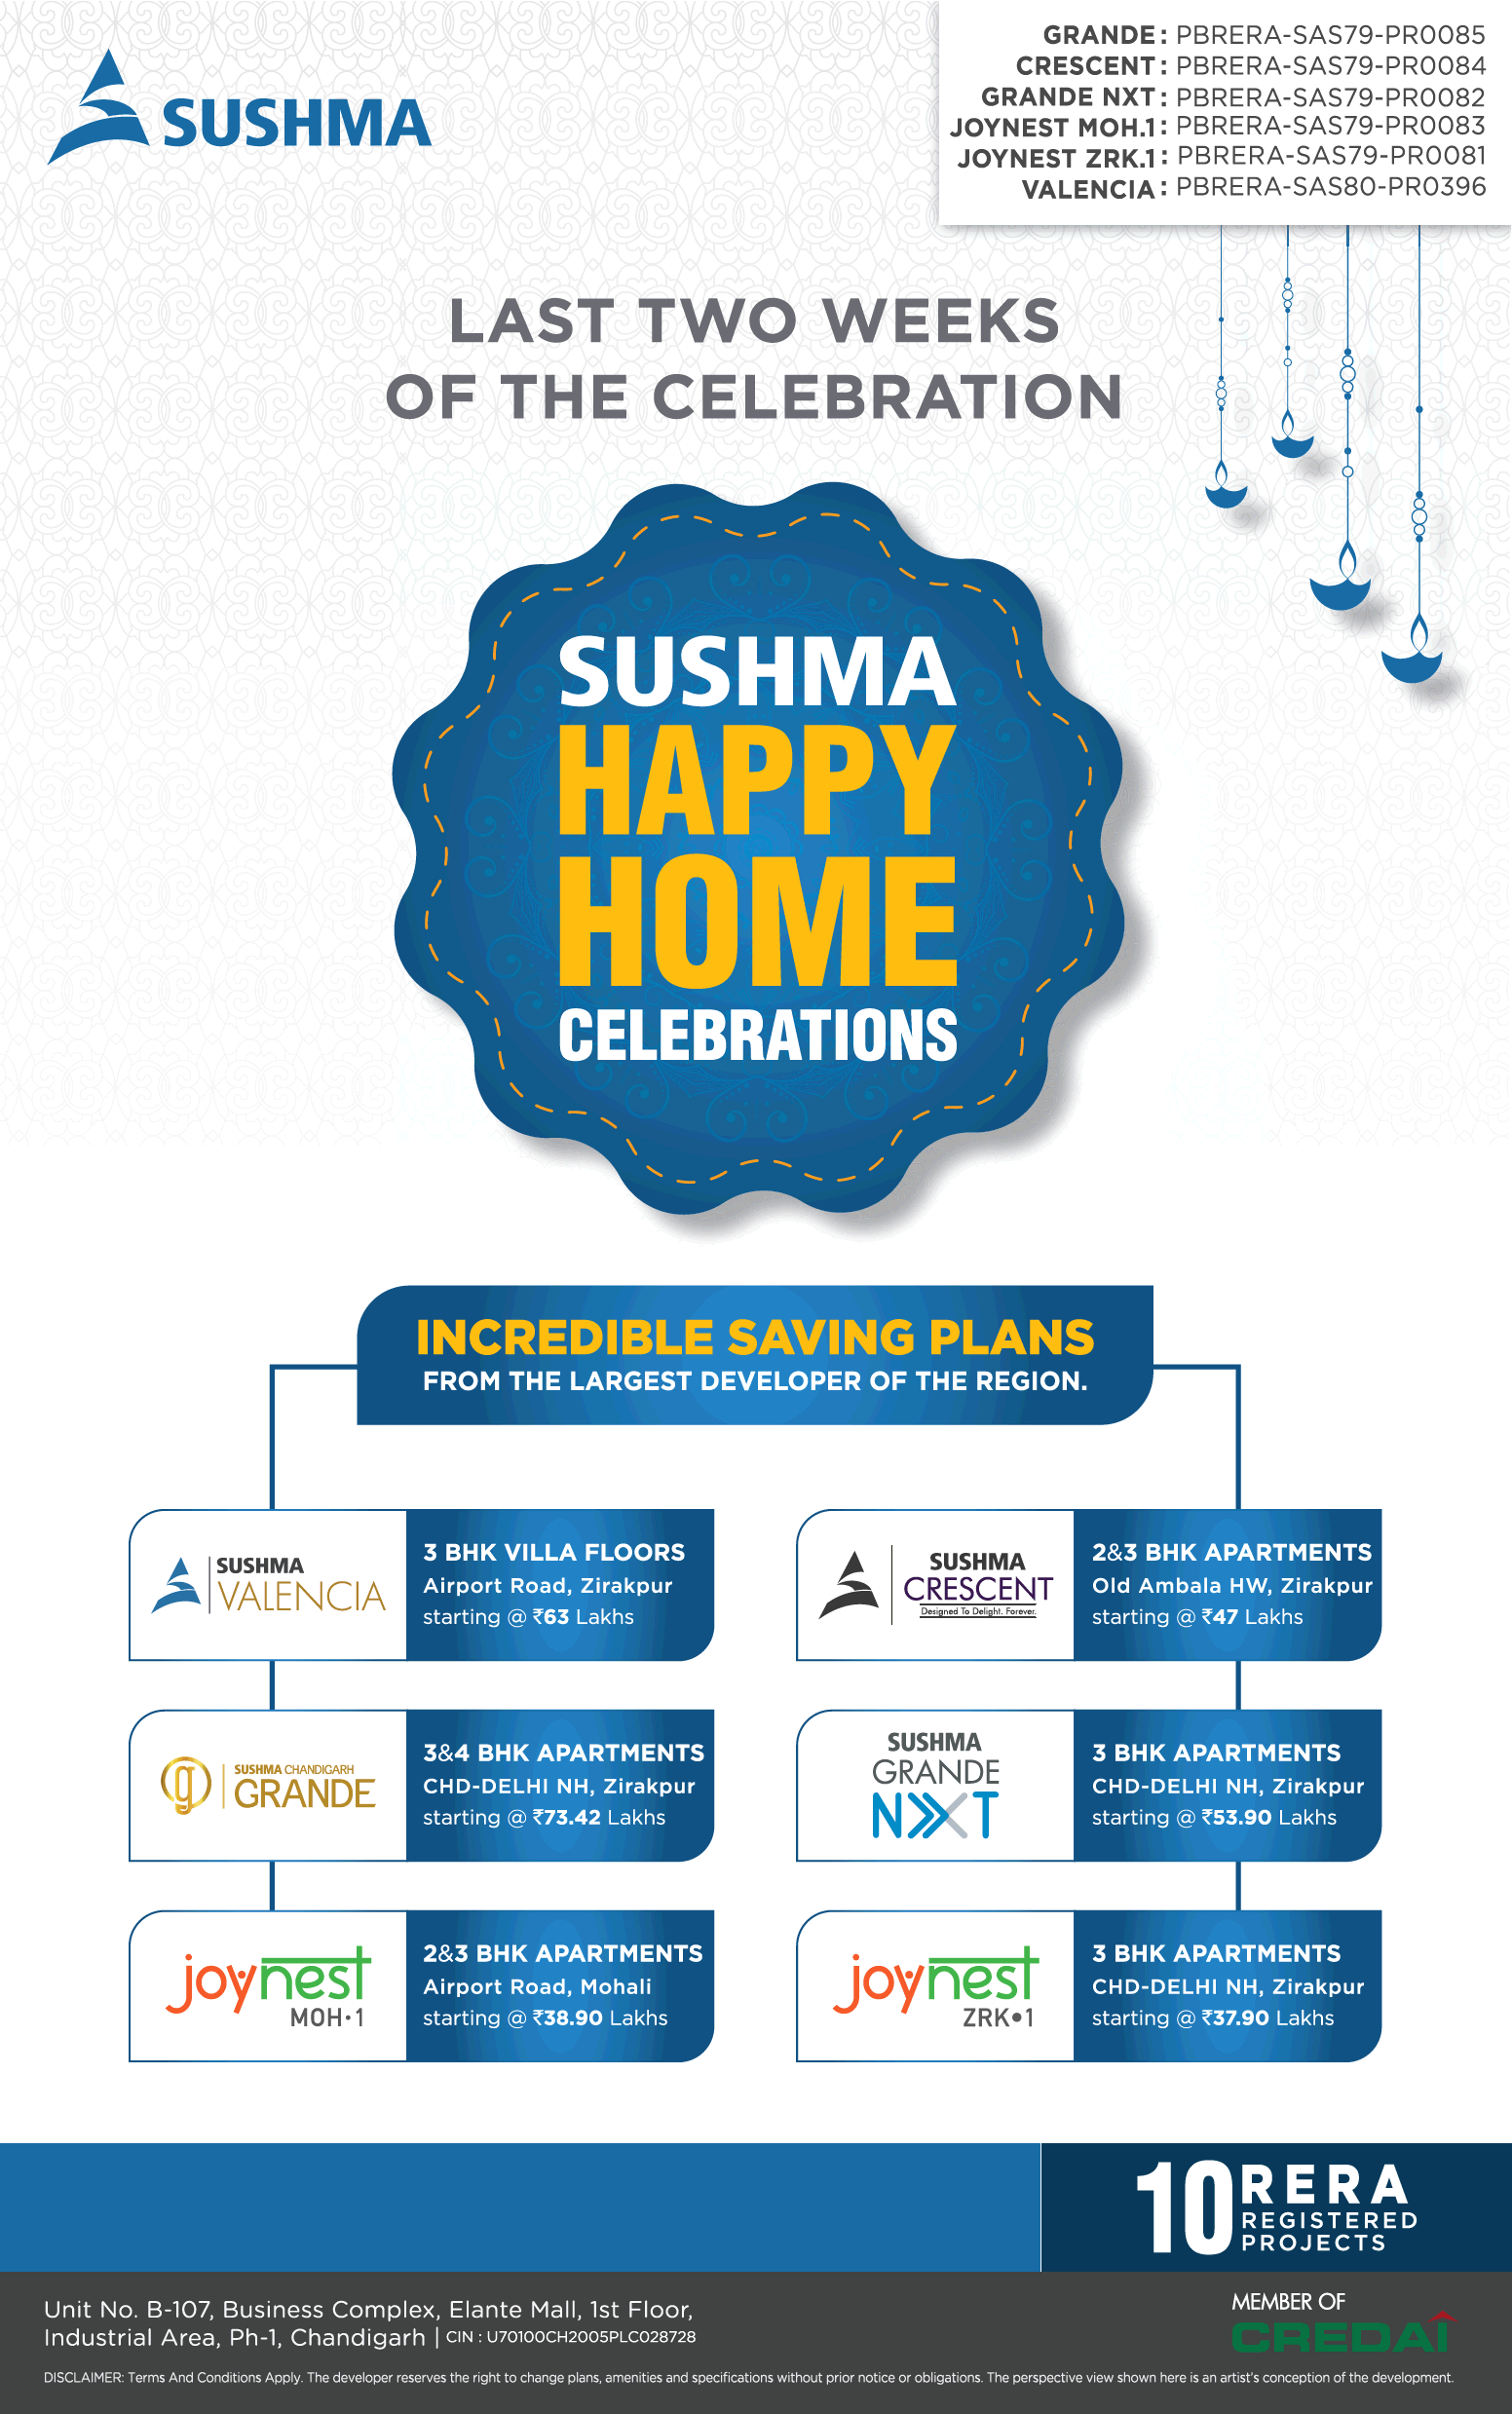 Last two weeks of the celebration at Sushma Buildtech, Chandigarh Update